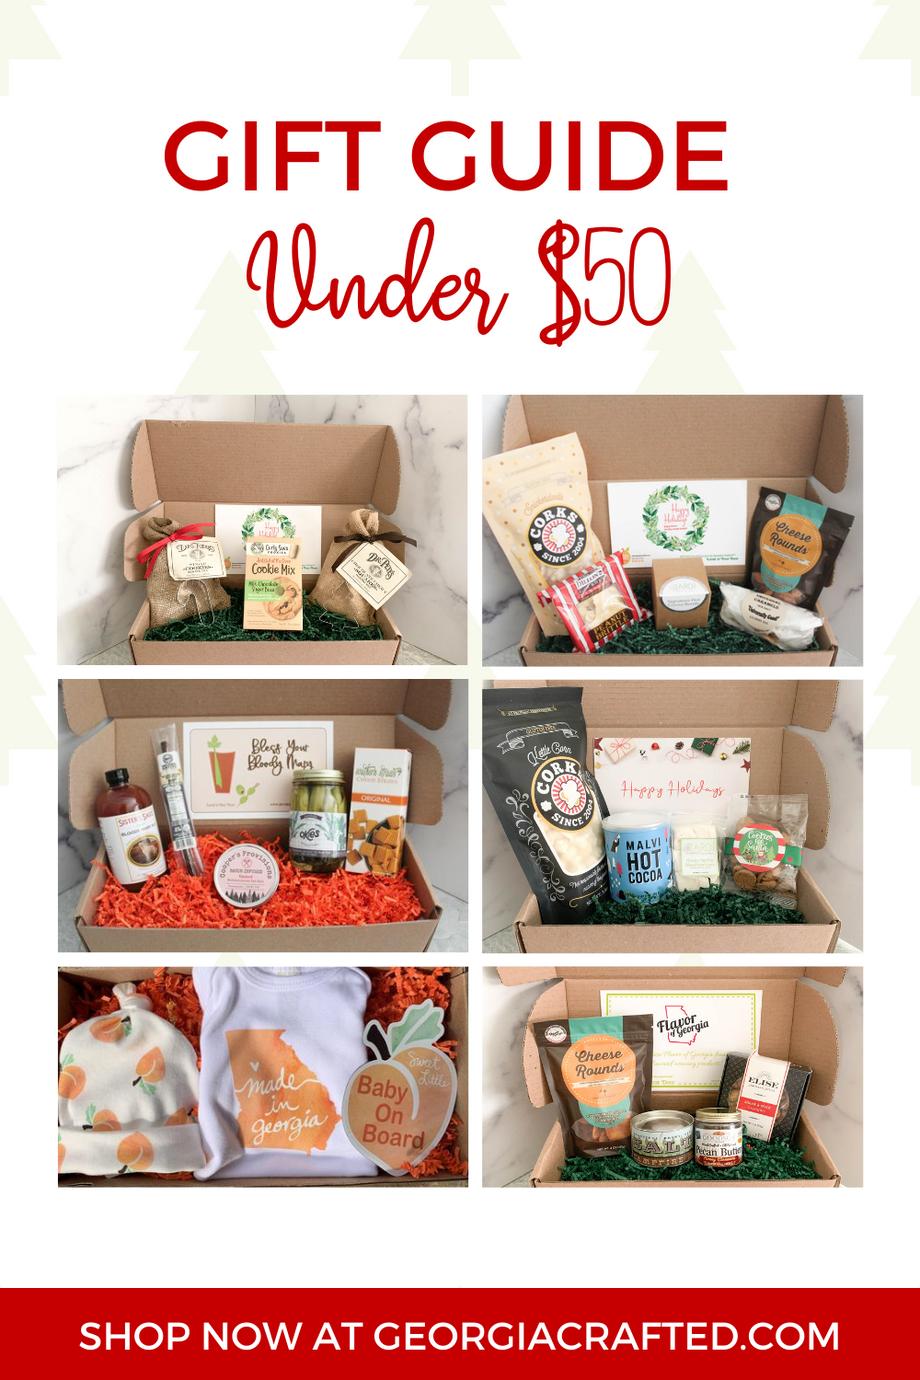 50 gifts under $50 - The Buy Guide